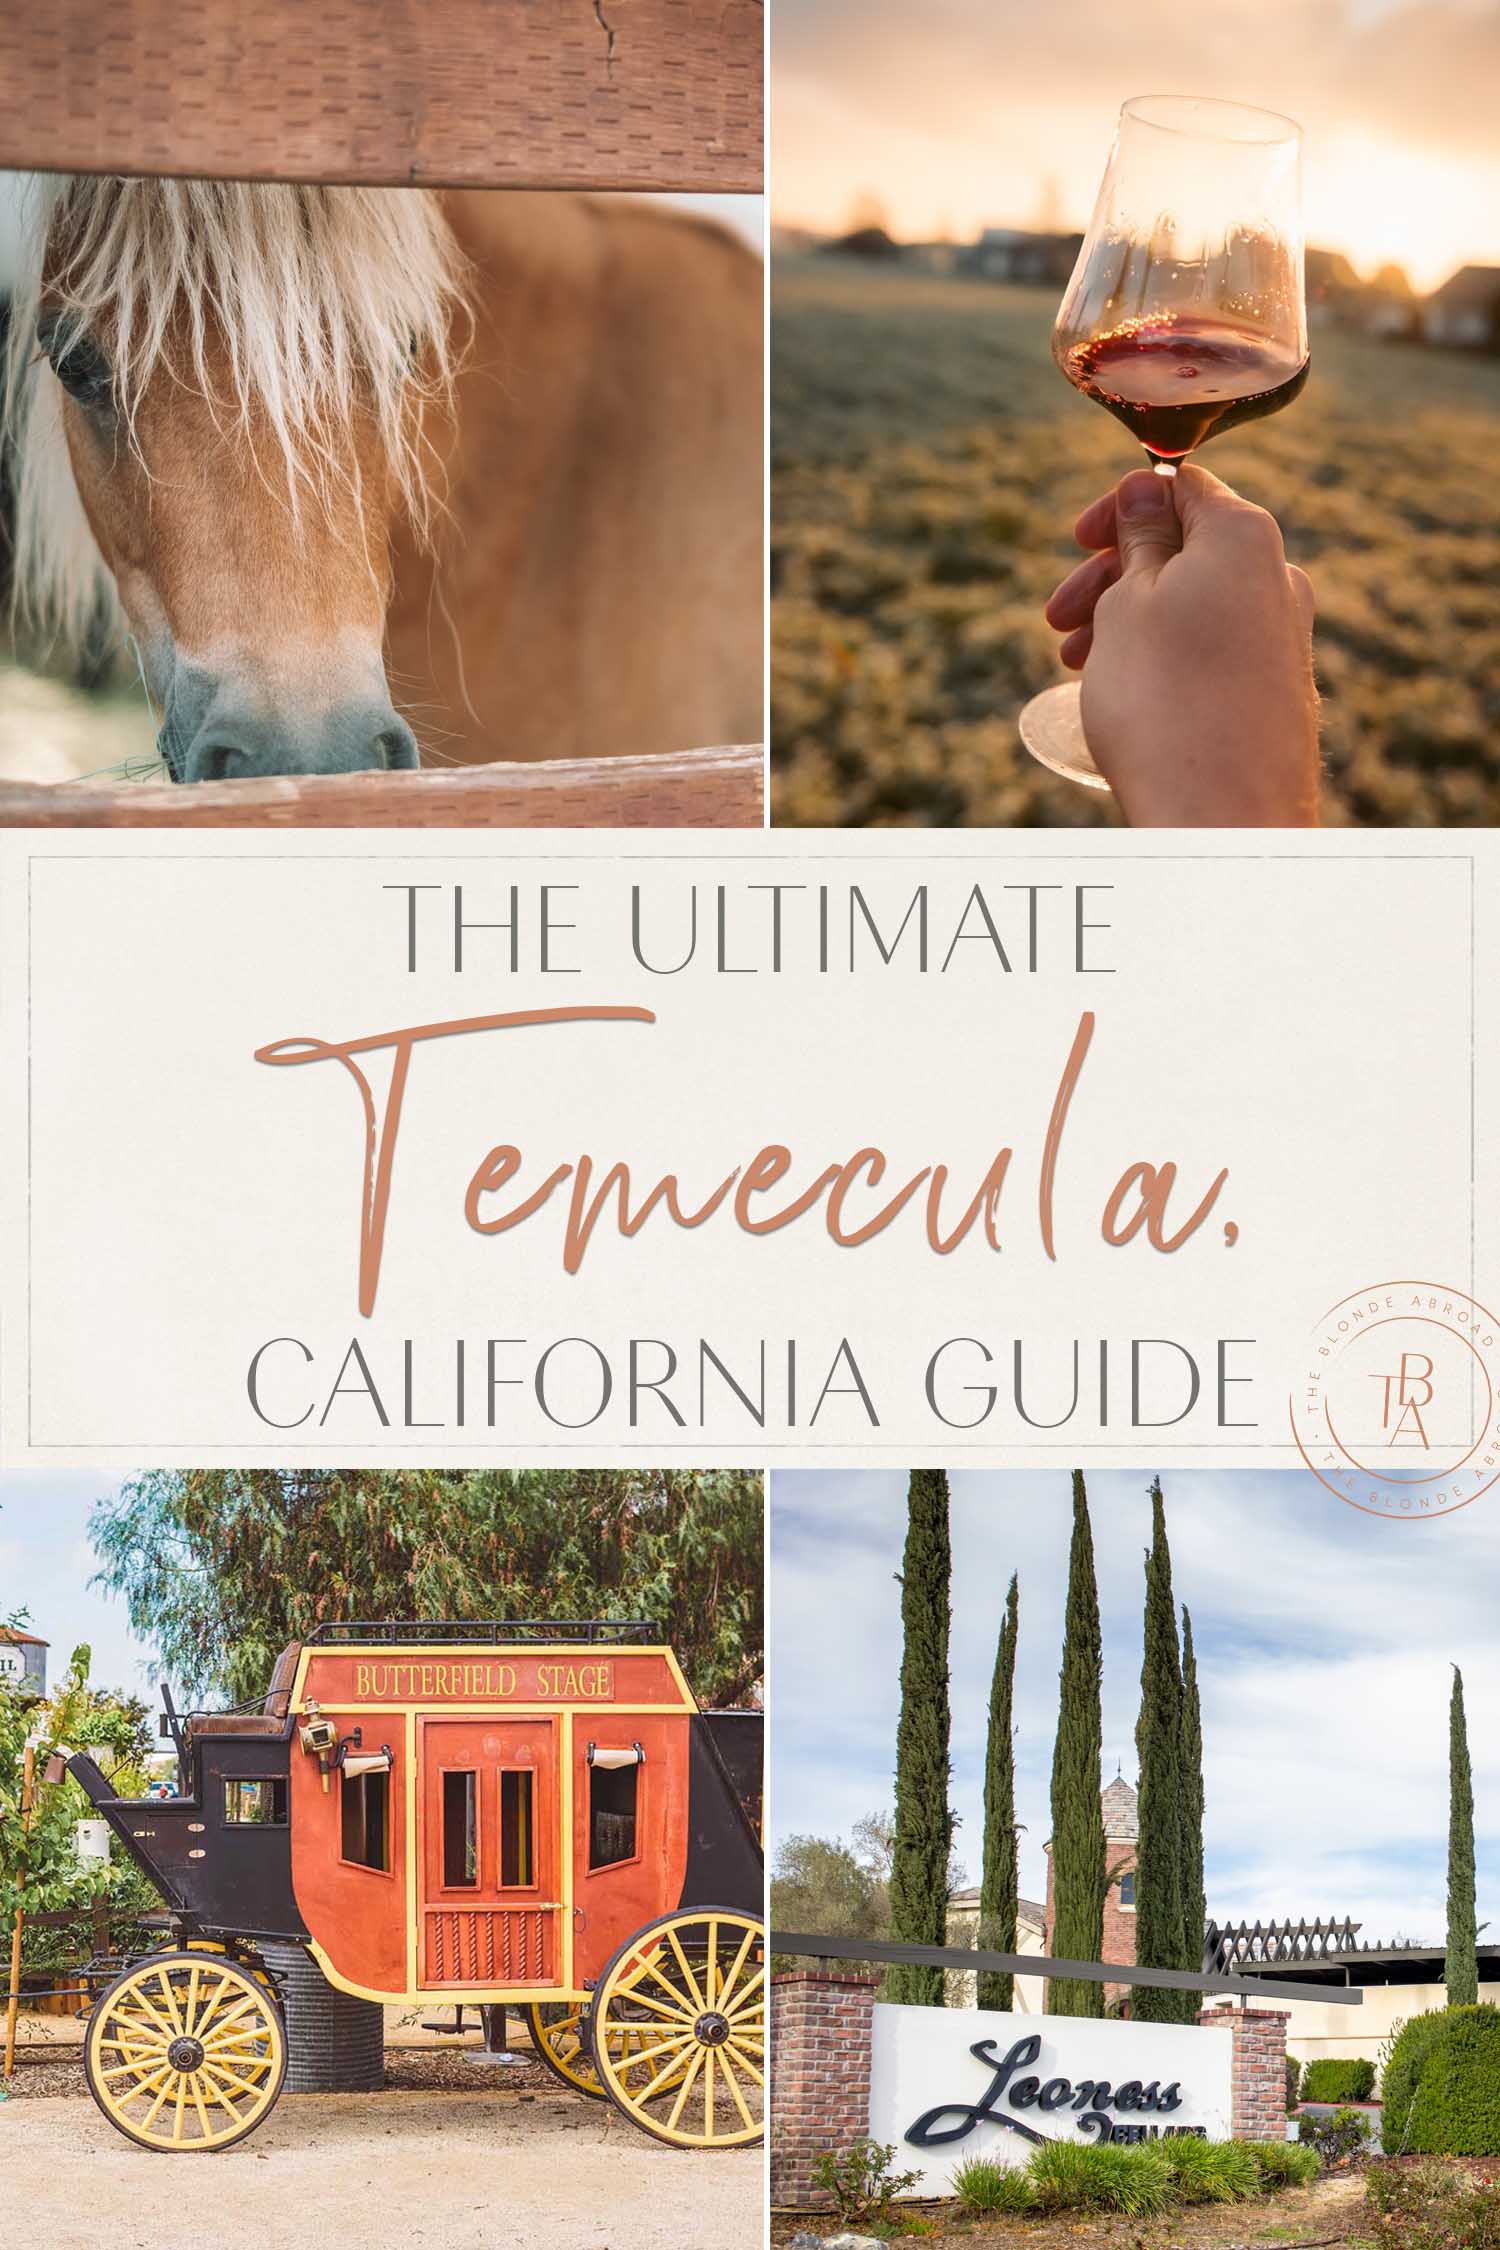 https://www.theblondeabroad.com/wp-content/uploads/2021/09/Temecula-California-Guide.jpg